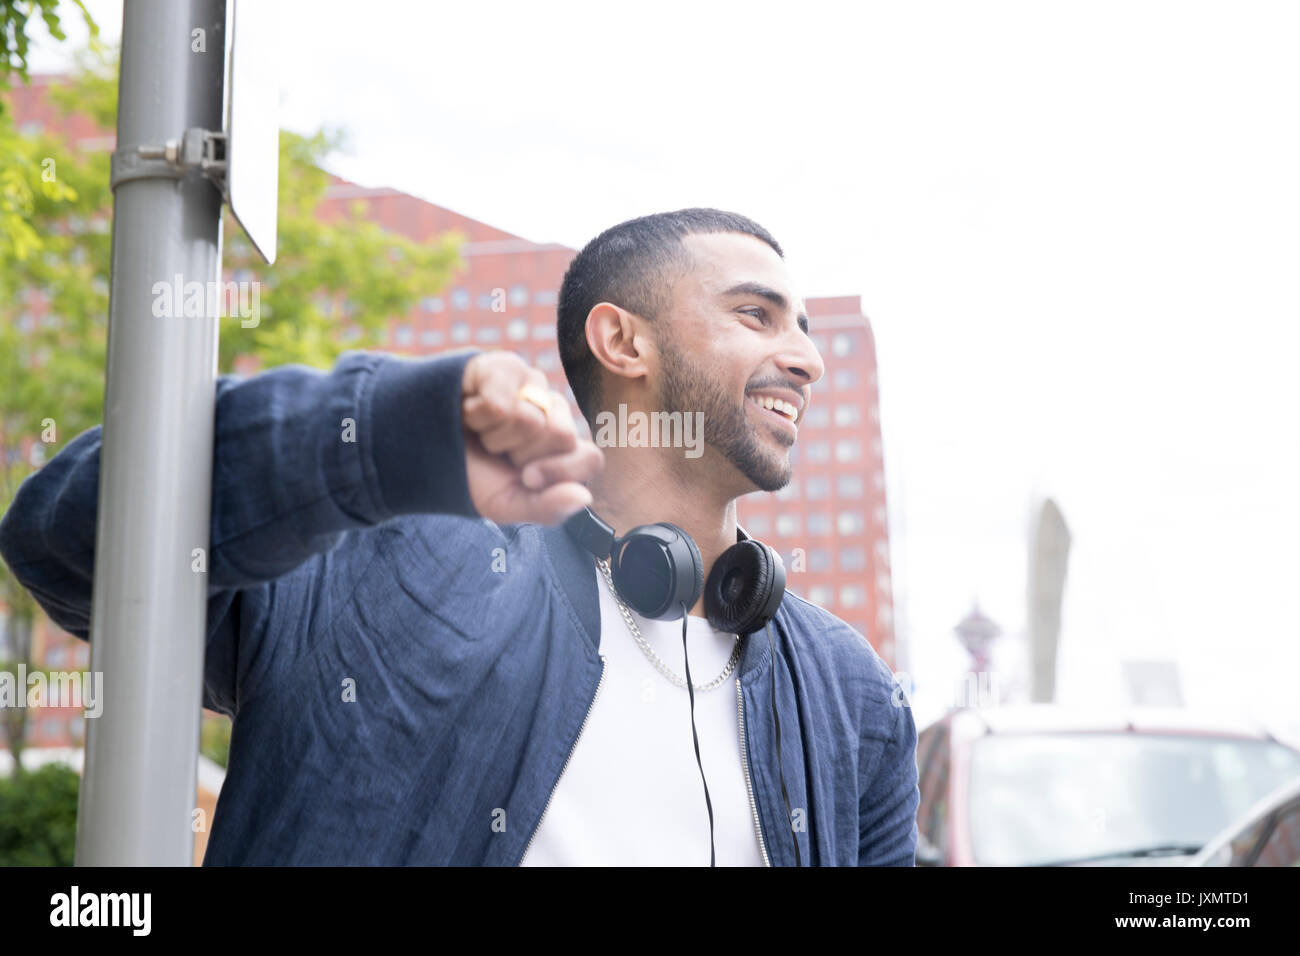 Young man leaning against lamppost, headphones around neck, smiling Stock Photo